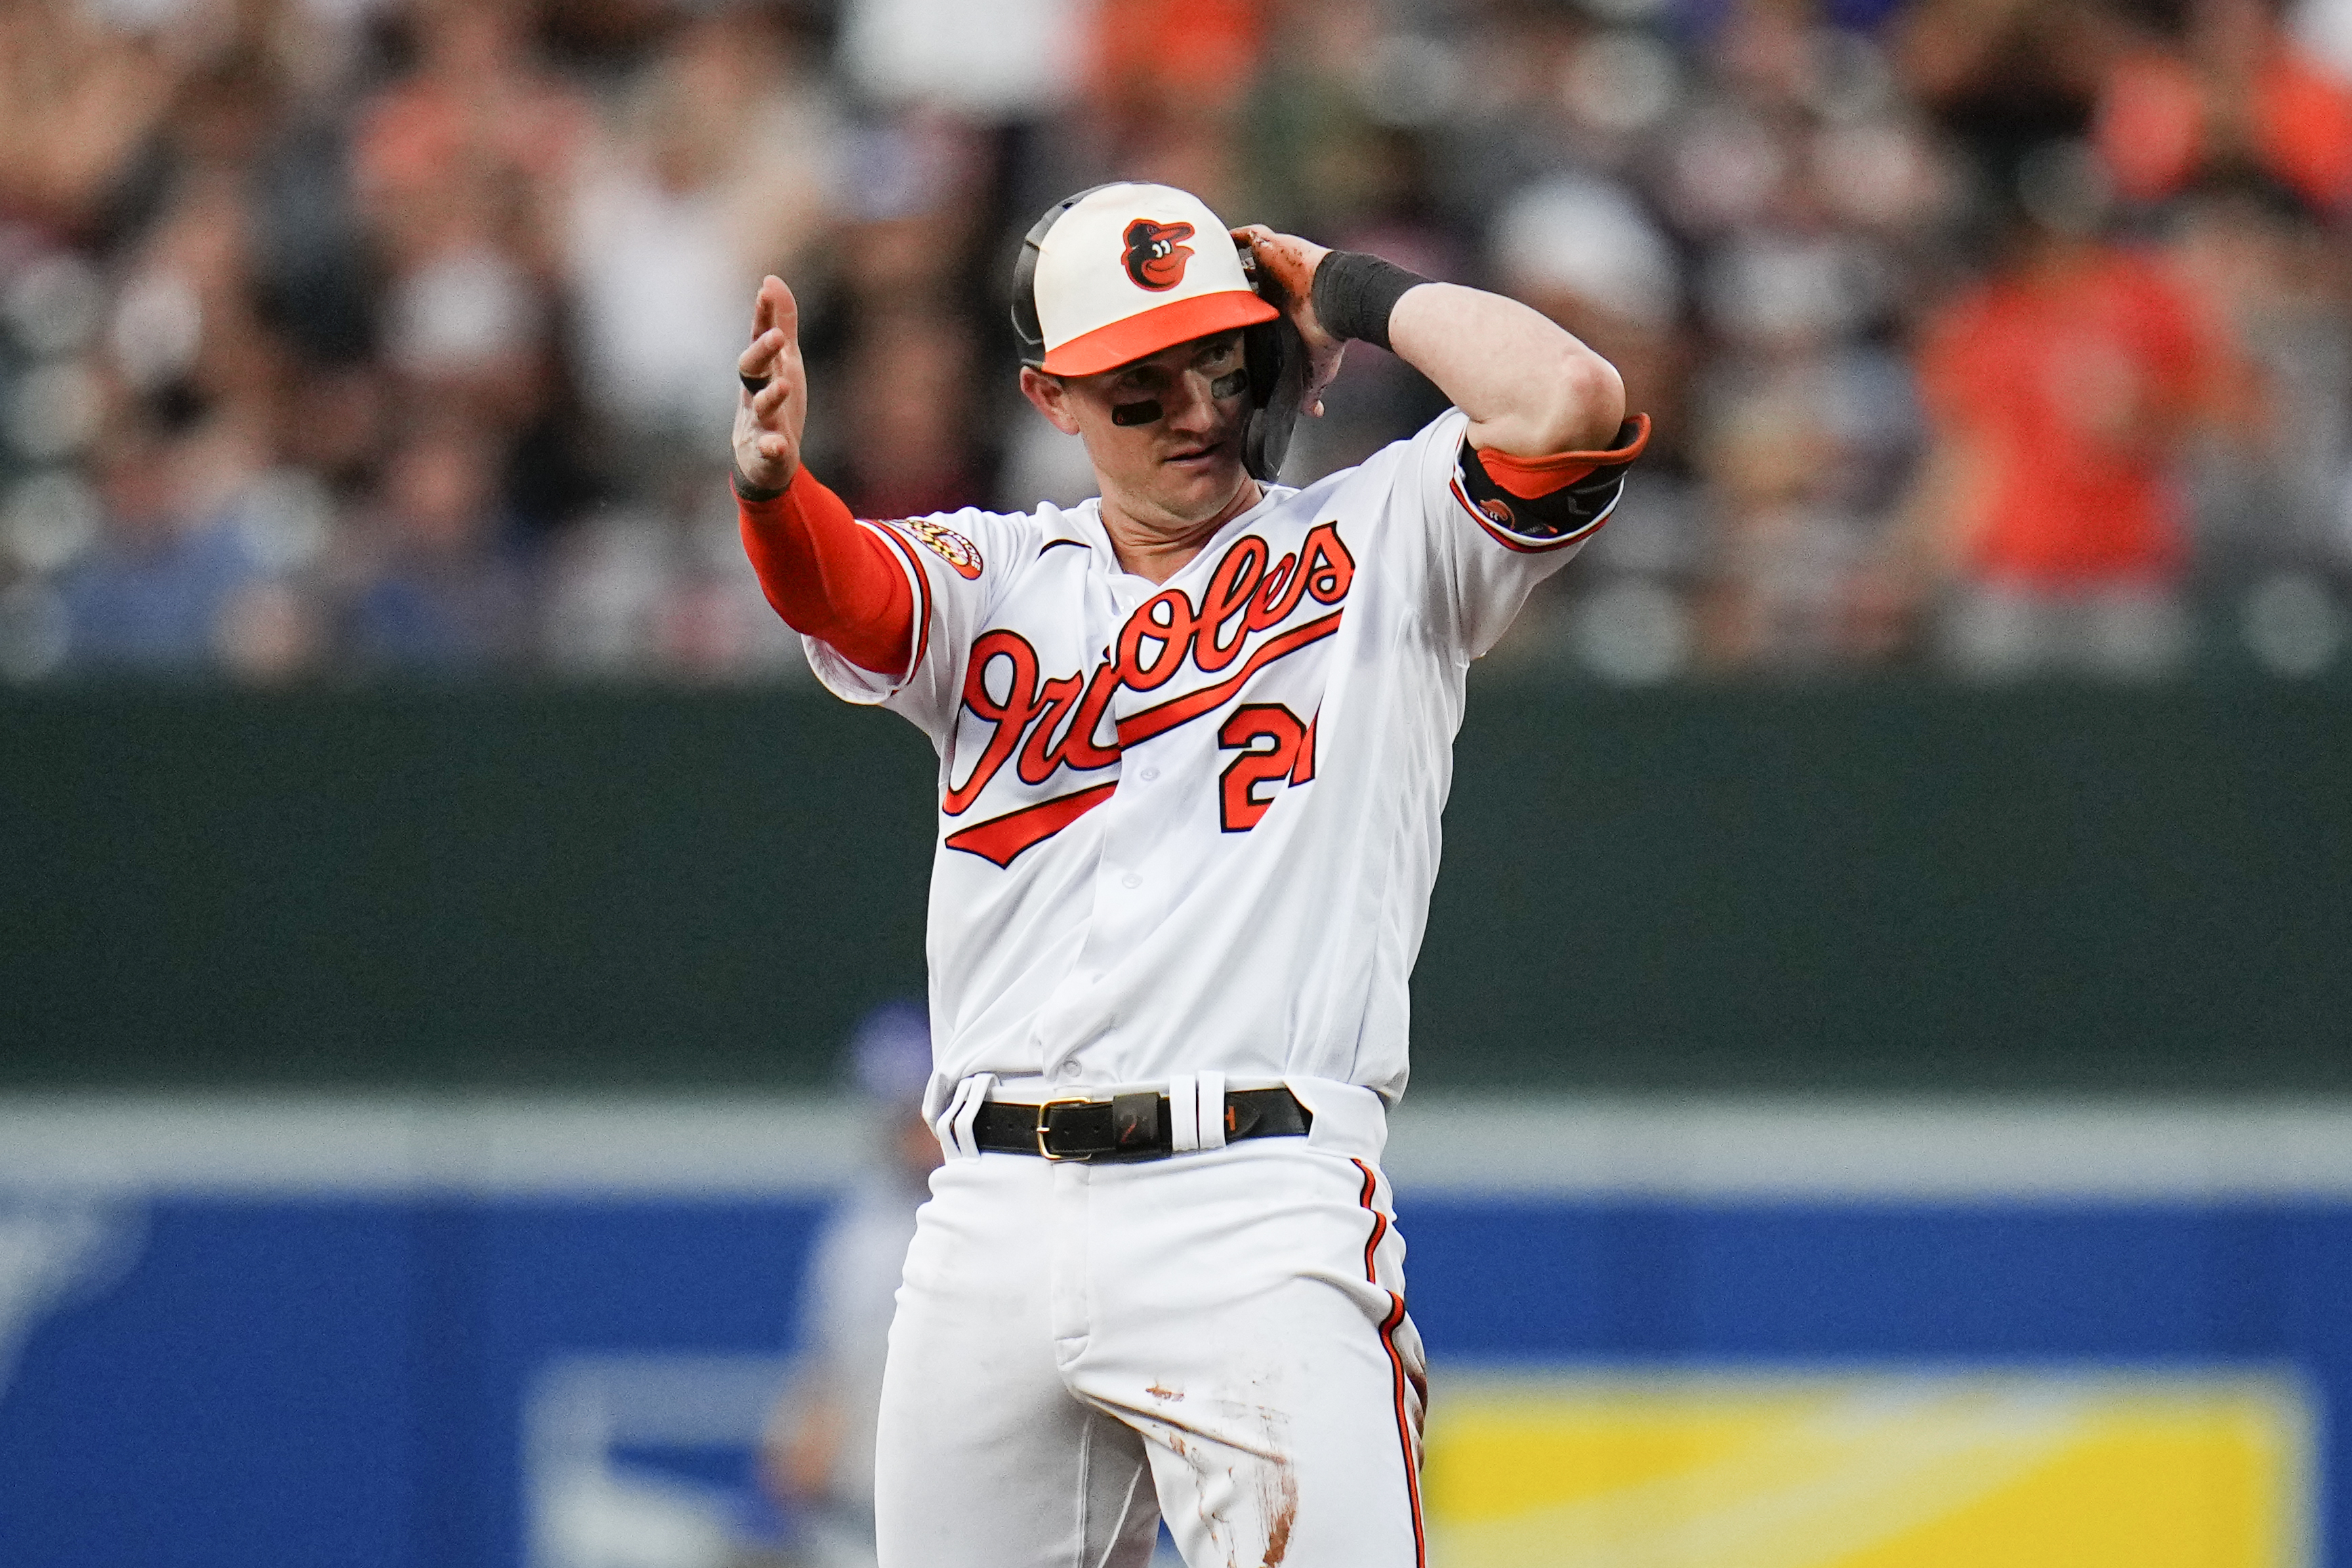 Ryan McKenna's walk-off homer in 10th gives Orioles dramatic 6-4